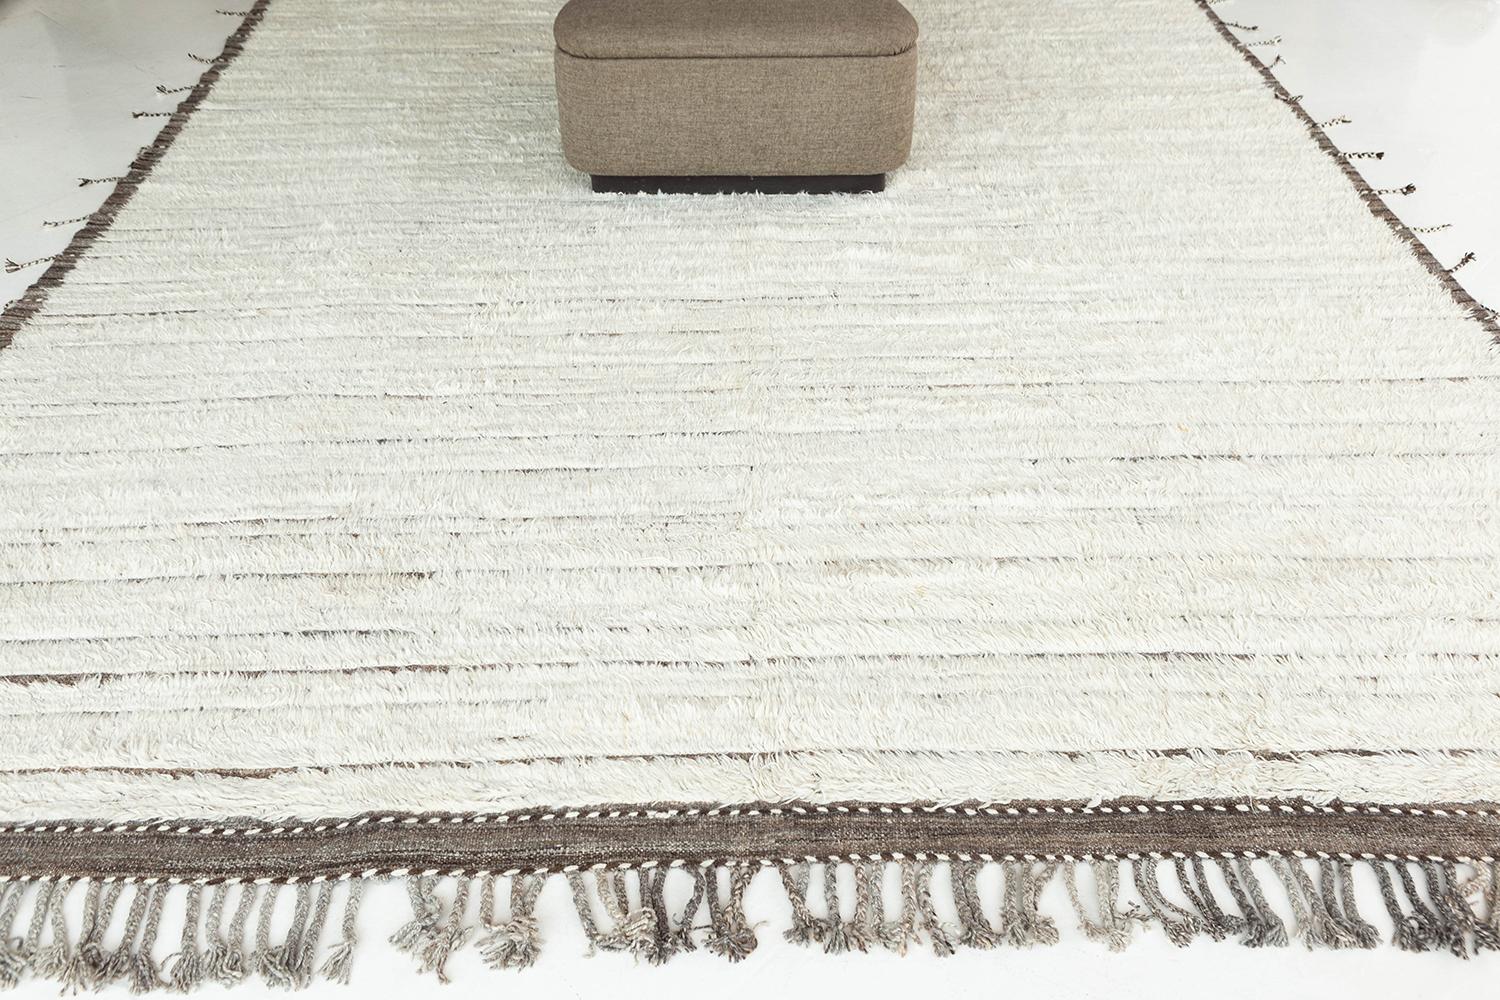 'Loo' is a handwoven luxurious wool rug with timeless embossed detailing. In addition to its neutral earth-toned taupe flat weave, Loo has a beautiful ivory shag that brings a lustrous and contemporary feel to one's space. The Haute Bohemian